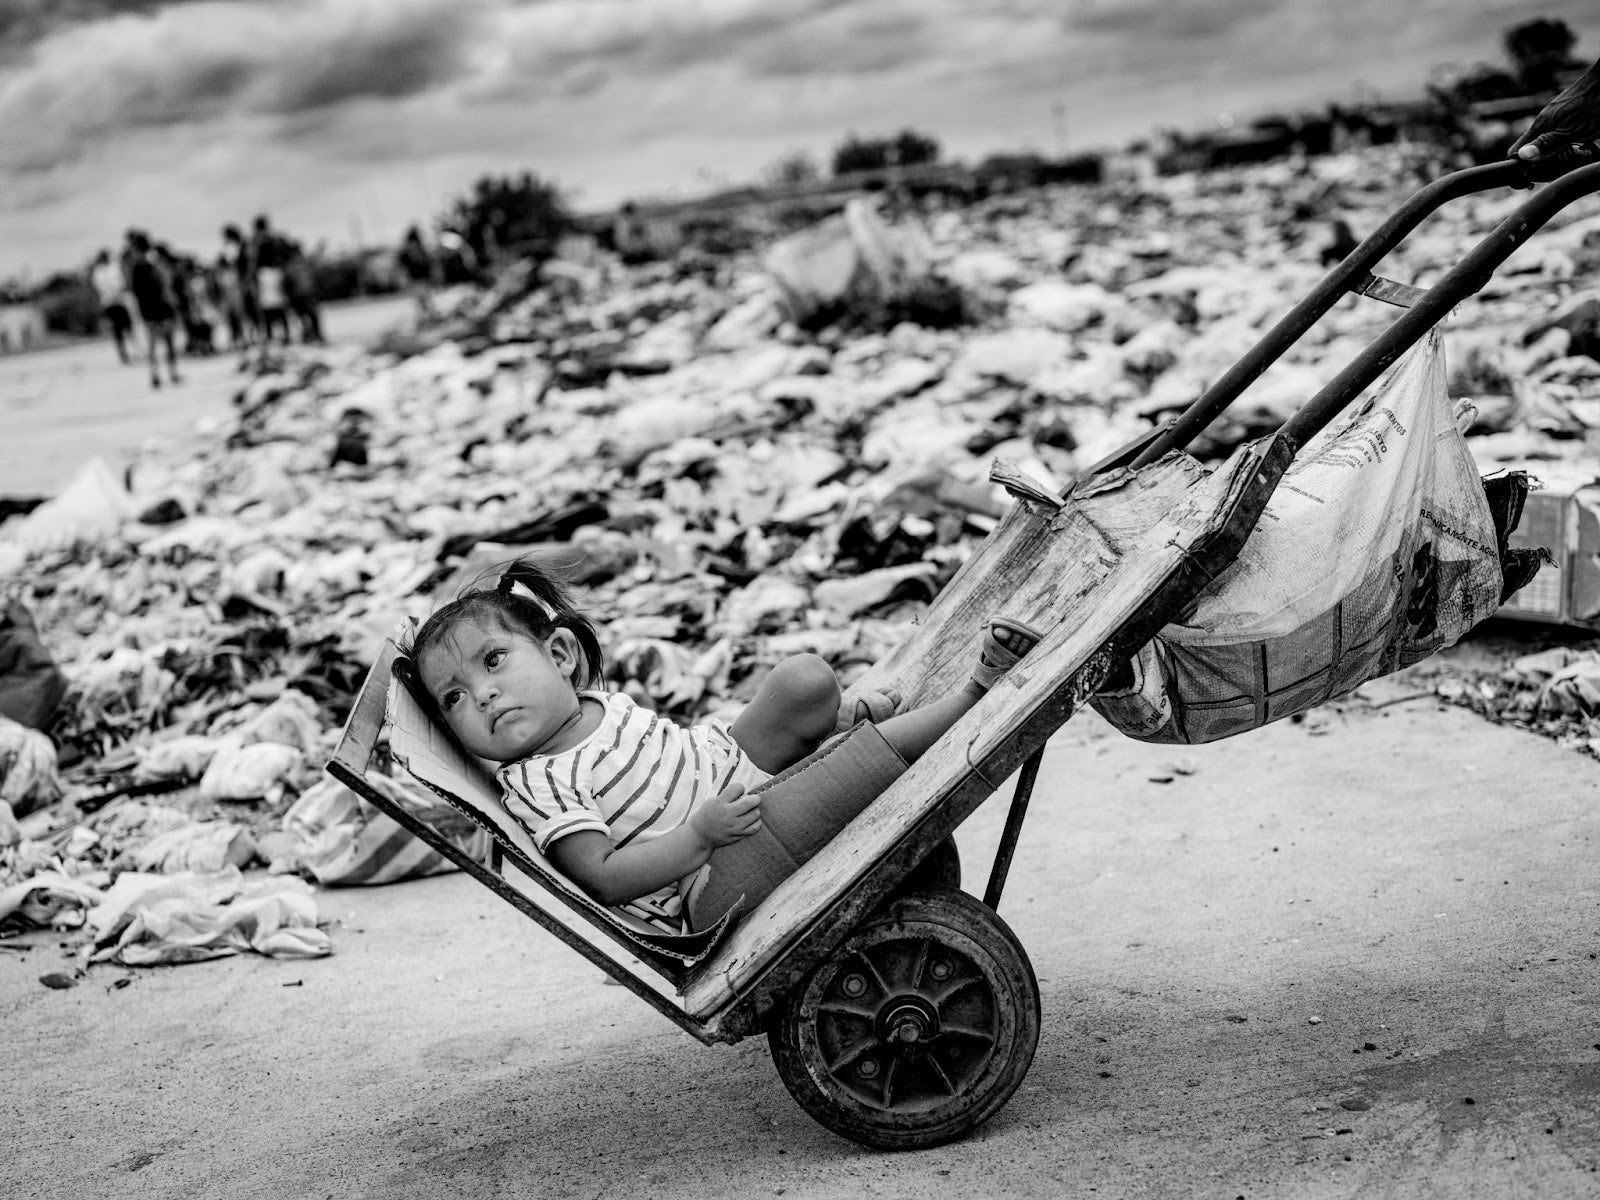 "The Children of the Financial Collapse in Venezuela," by Jan Grarup.